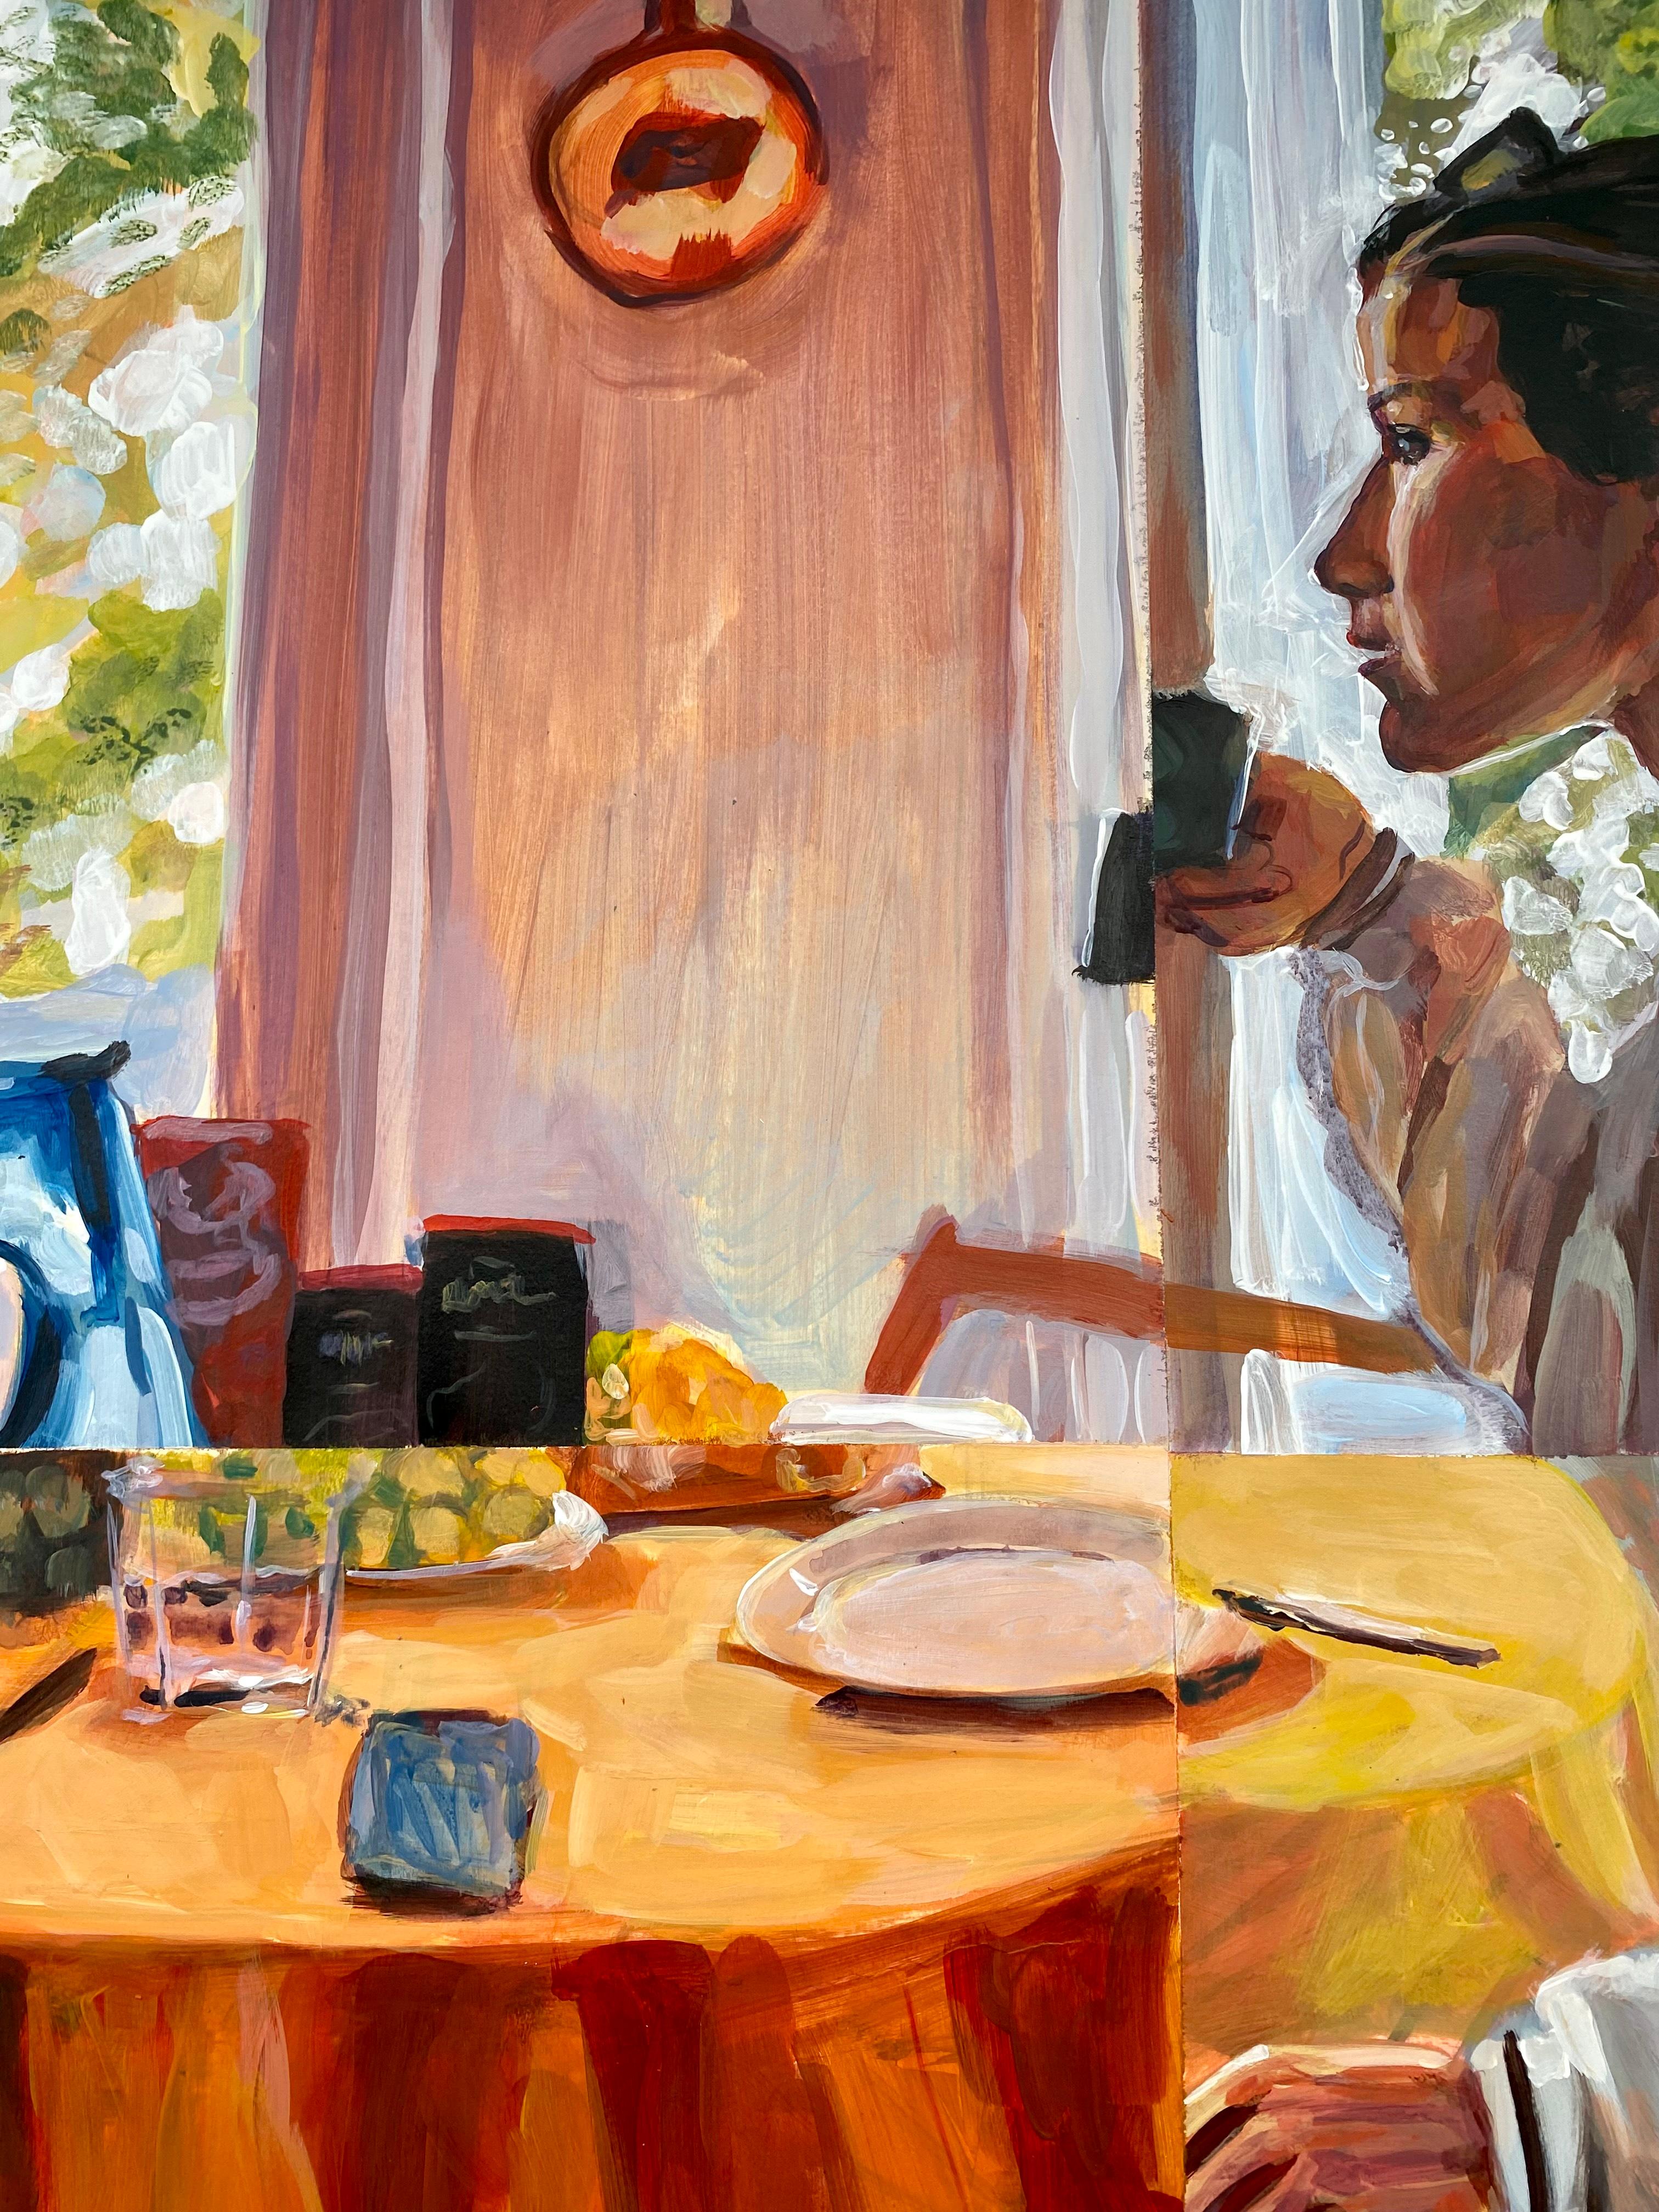 This artwork of two women drinking coffee. It is an intriguing piece that captures the complexity of time and its connection to individual experiences.

The artwork is split up into six frames, each one created separately in order to focus on the